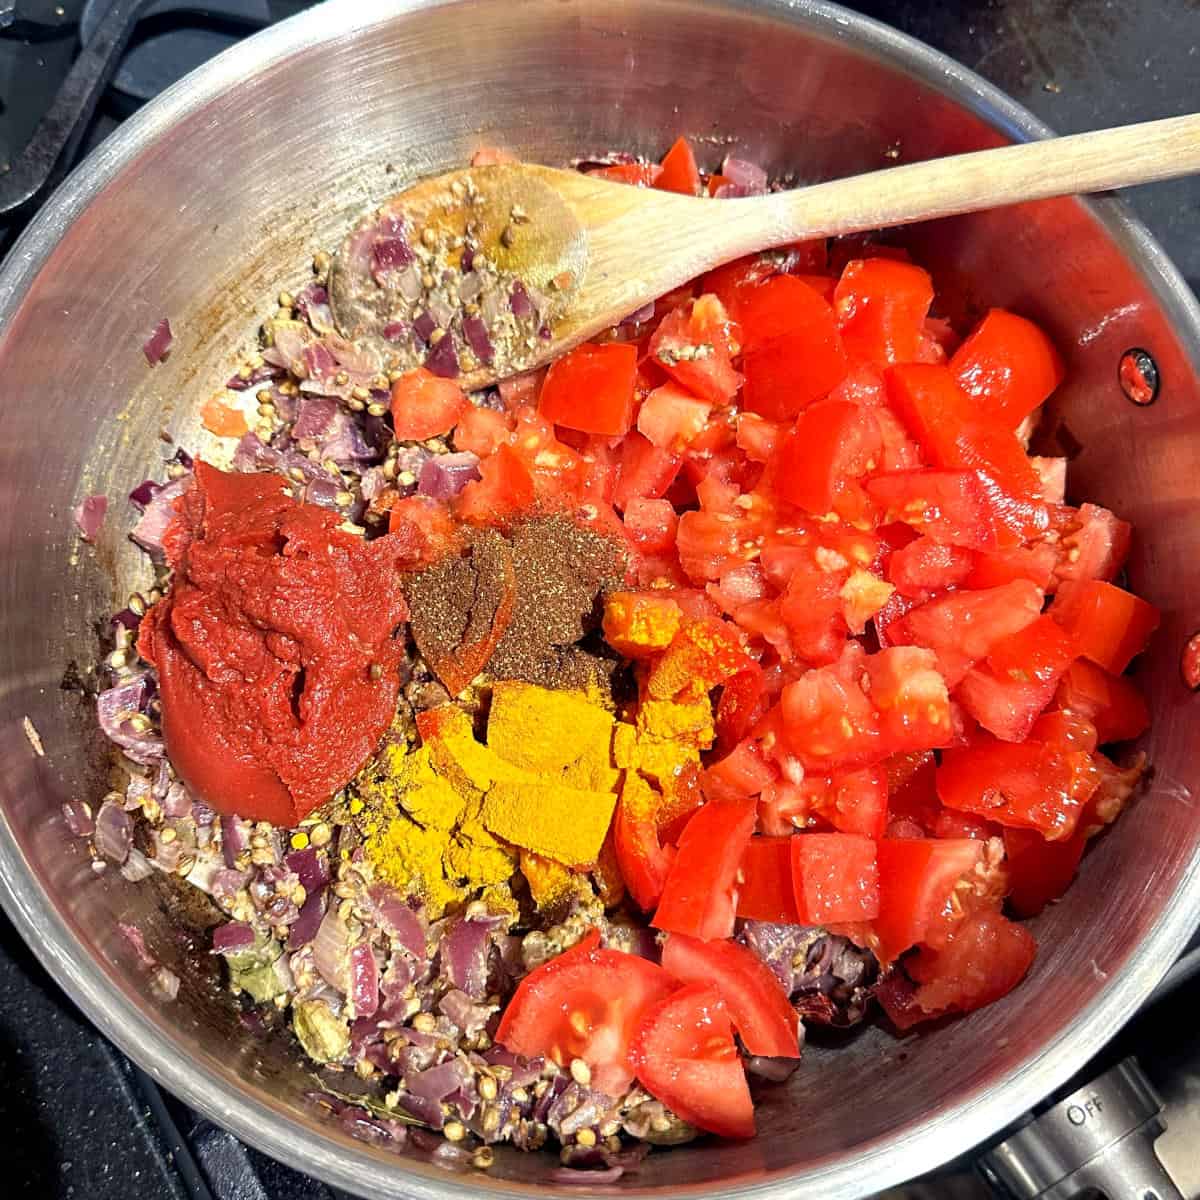 Tomatoes, tomato paste and spices added to onions.